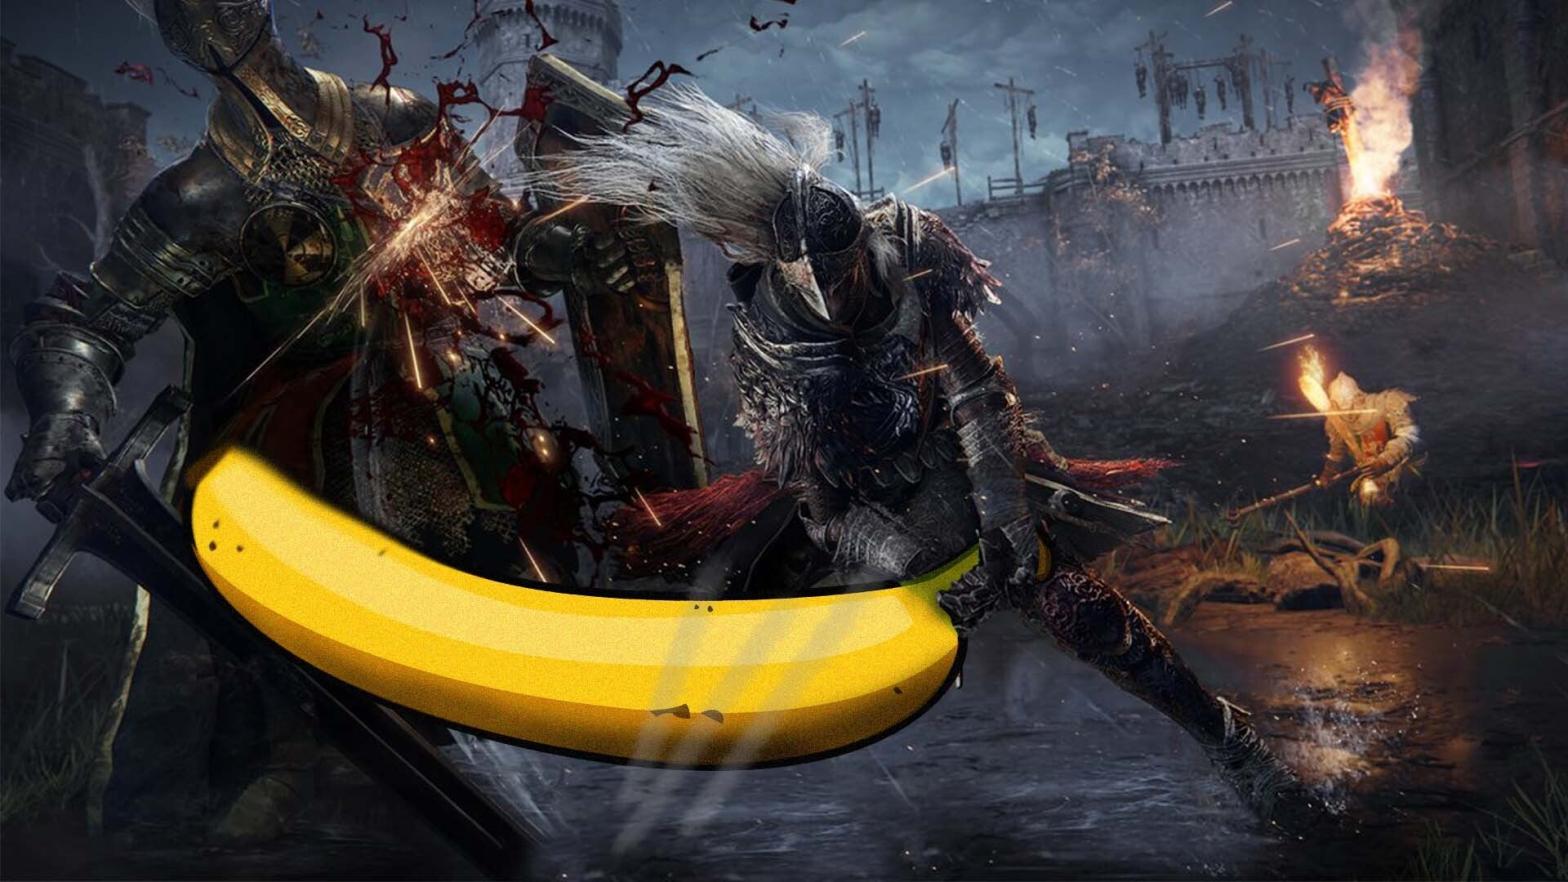 This controller is bananas. B-A-N-A-N-A-S. (Image: FromSoftware / Kotaku)